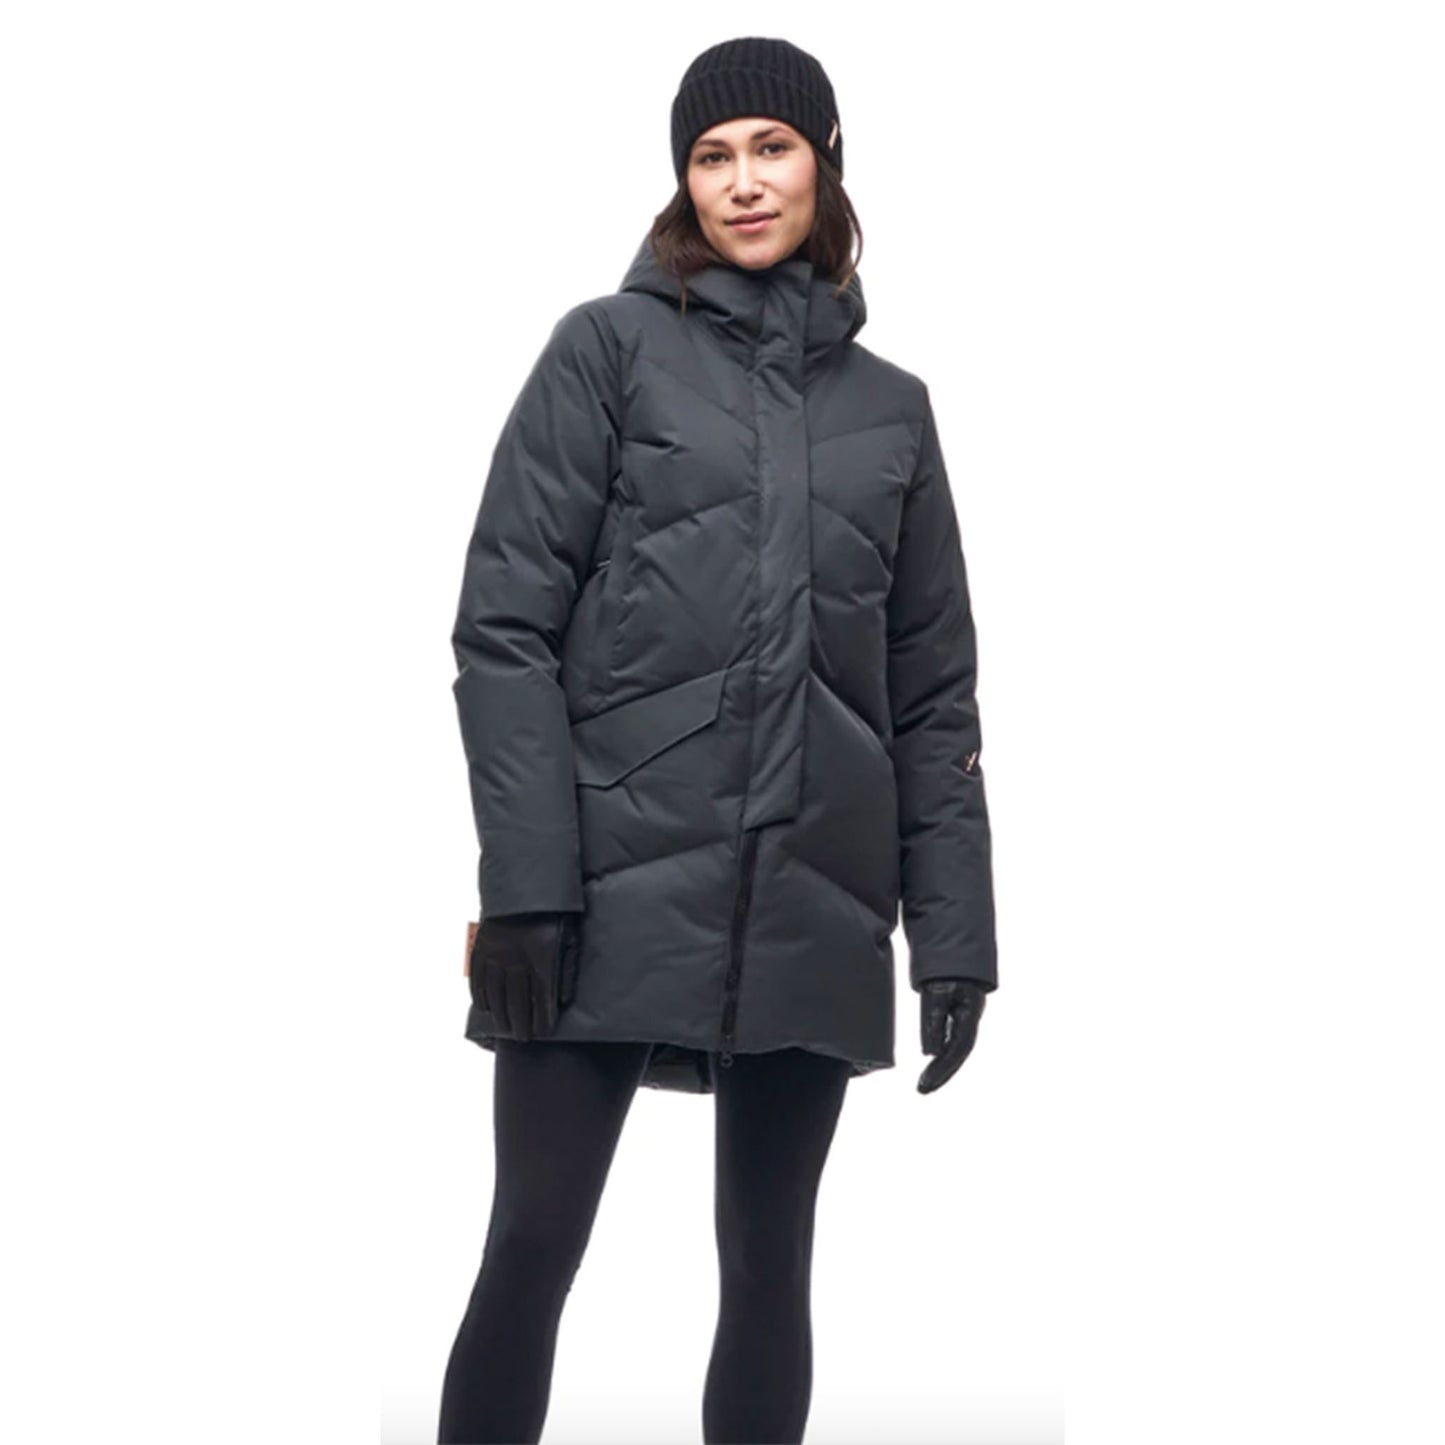 Indyeva Ayaba Simplified Parka in Deep Forest front view